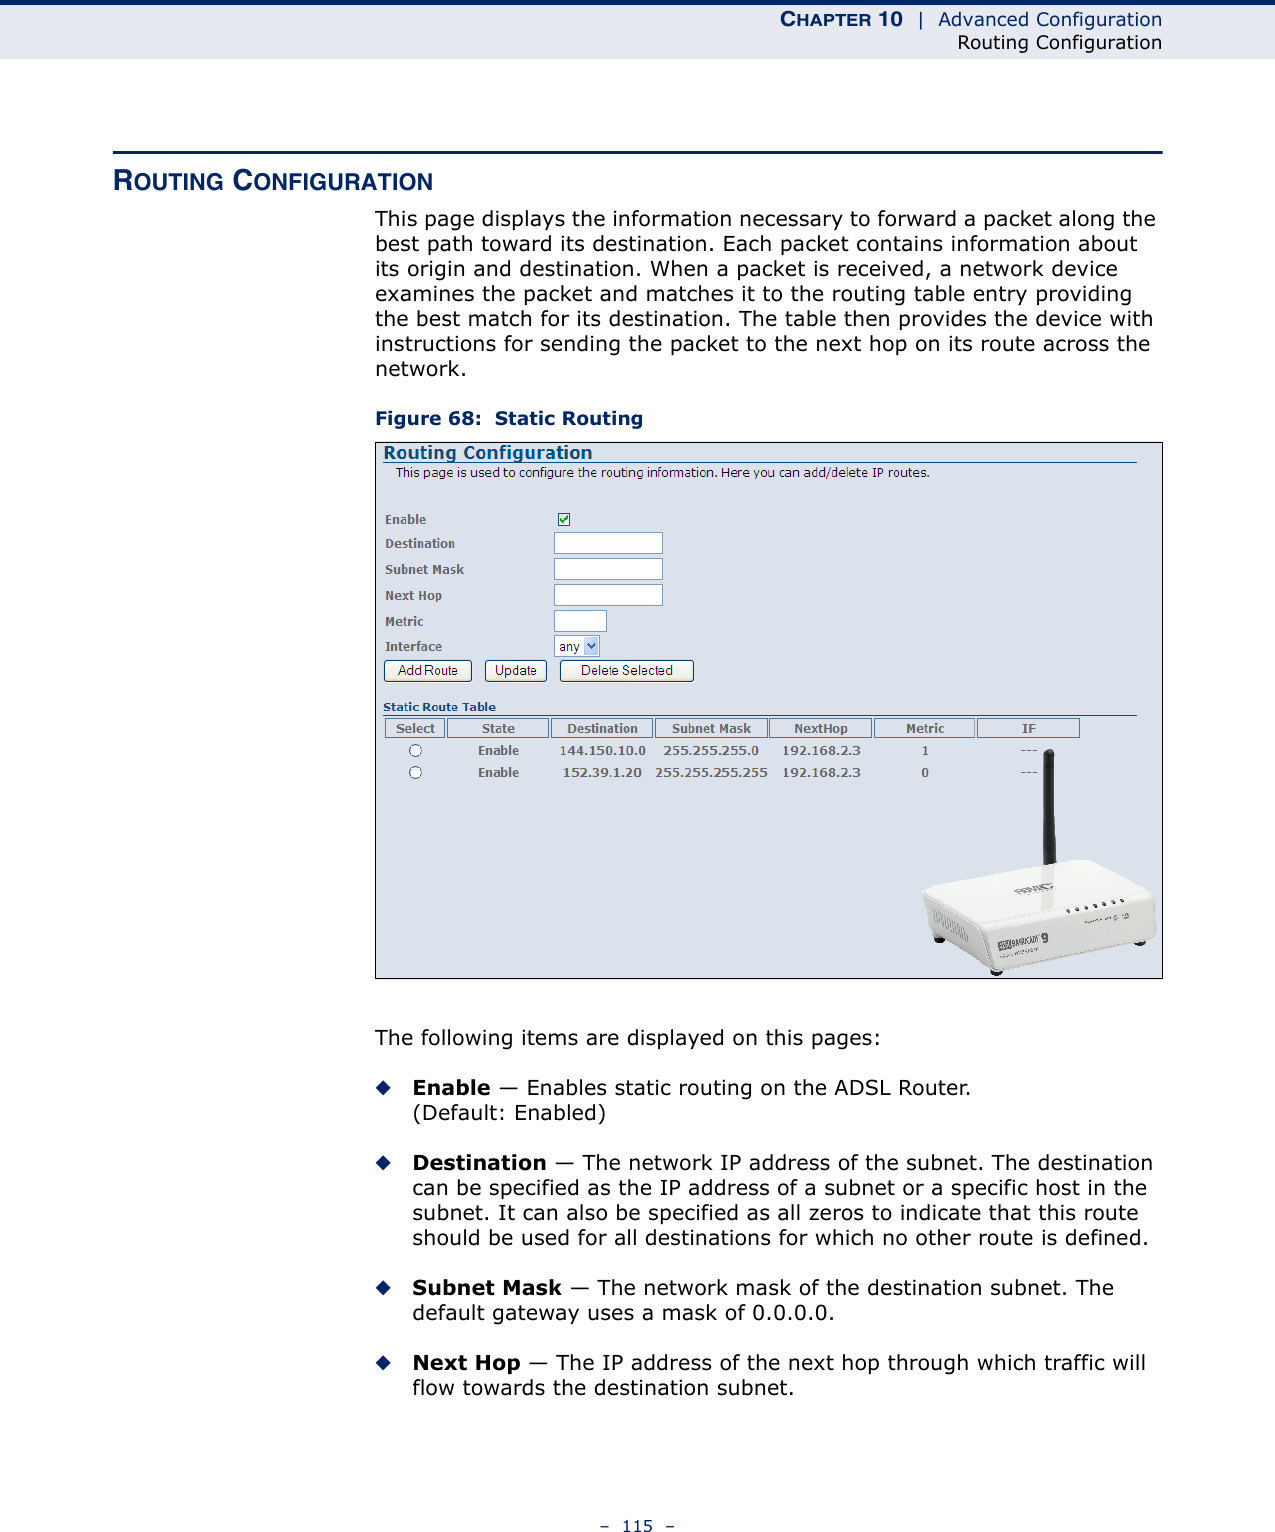 CHAPTER 10  |  Advanced ConfigurationRouting Configuration–  115  –ROUTING CONFIGURATIONThis page displays the information necessary to forward a packet along the best path toward its destination. Each packet contains information about its origin and destination. When a packet is received, a network device examines the packet and matches it to the routing table entry providing the best match for its destination. The table then provides the device with instructions for sending the packet to the next hop on its route across the network.Figure 68:  Static RoutingThe following items are displayed on this pages:◆Enable — Enables static routing on the ADSL Router. (Default: Enabled)◆Destination — The network IP address of the subnet. The destination can be specified as the IP address of a subnet or a specific host in the subnet. It can also be specified as all zeros to indicate that this route should be used for all destinations for which no other route is defined.◆Subnet Mask — The network mask of the destination subnet. The default gateway uses a mask of 0.0.0.0.◆Next Hop — The IP address of the next hop through which traffic will flow towards the destination subnet. 